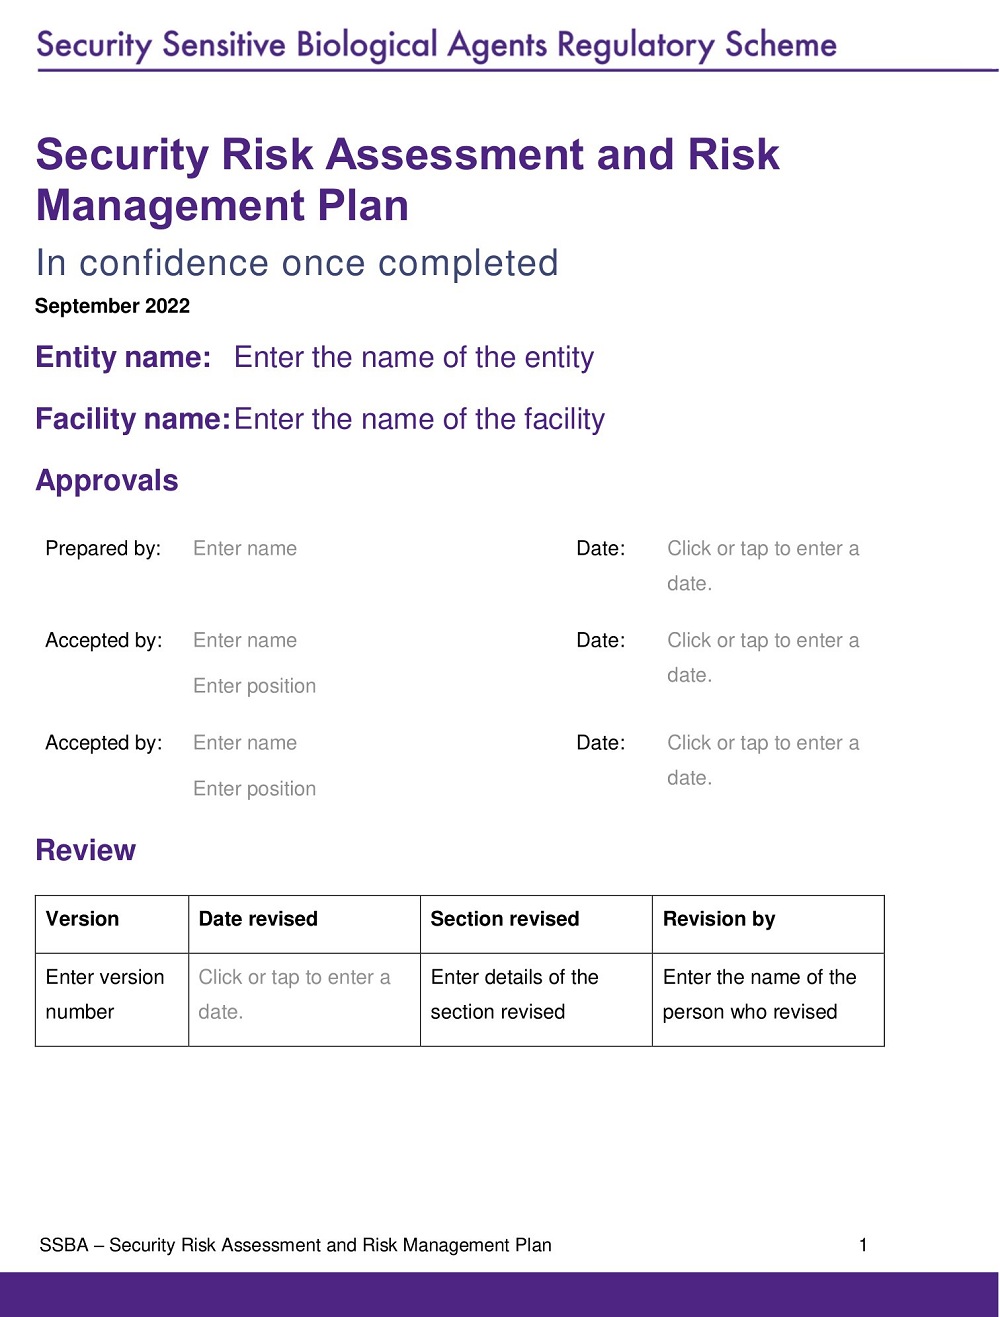 Security Risk Assessment and Risk Management Plan